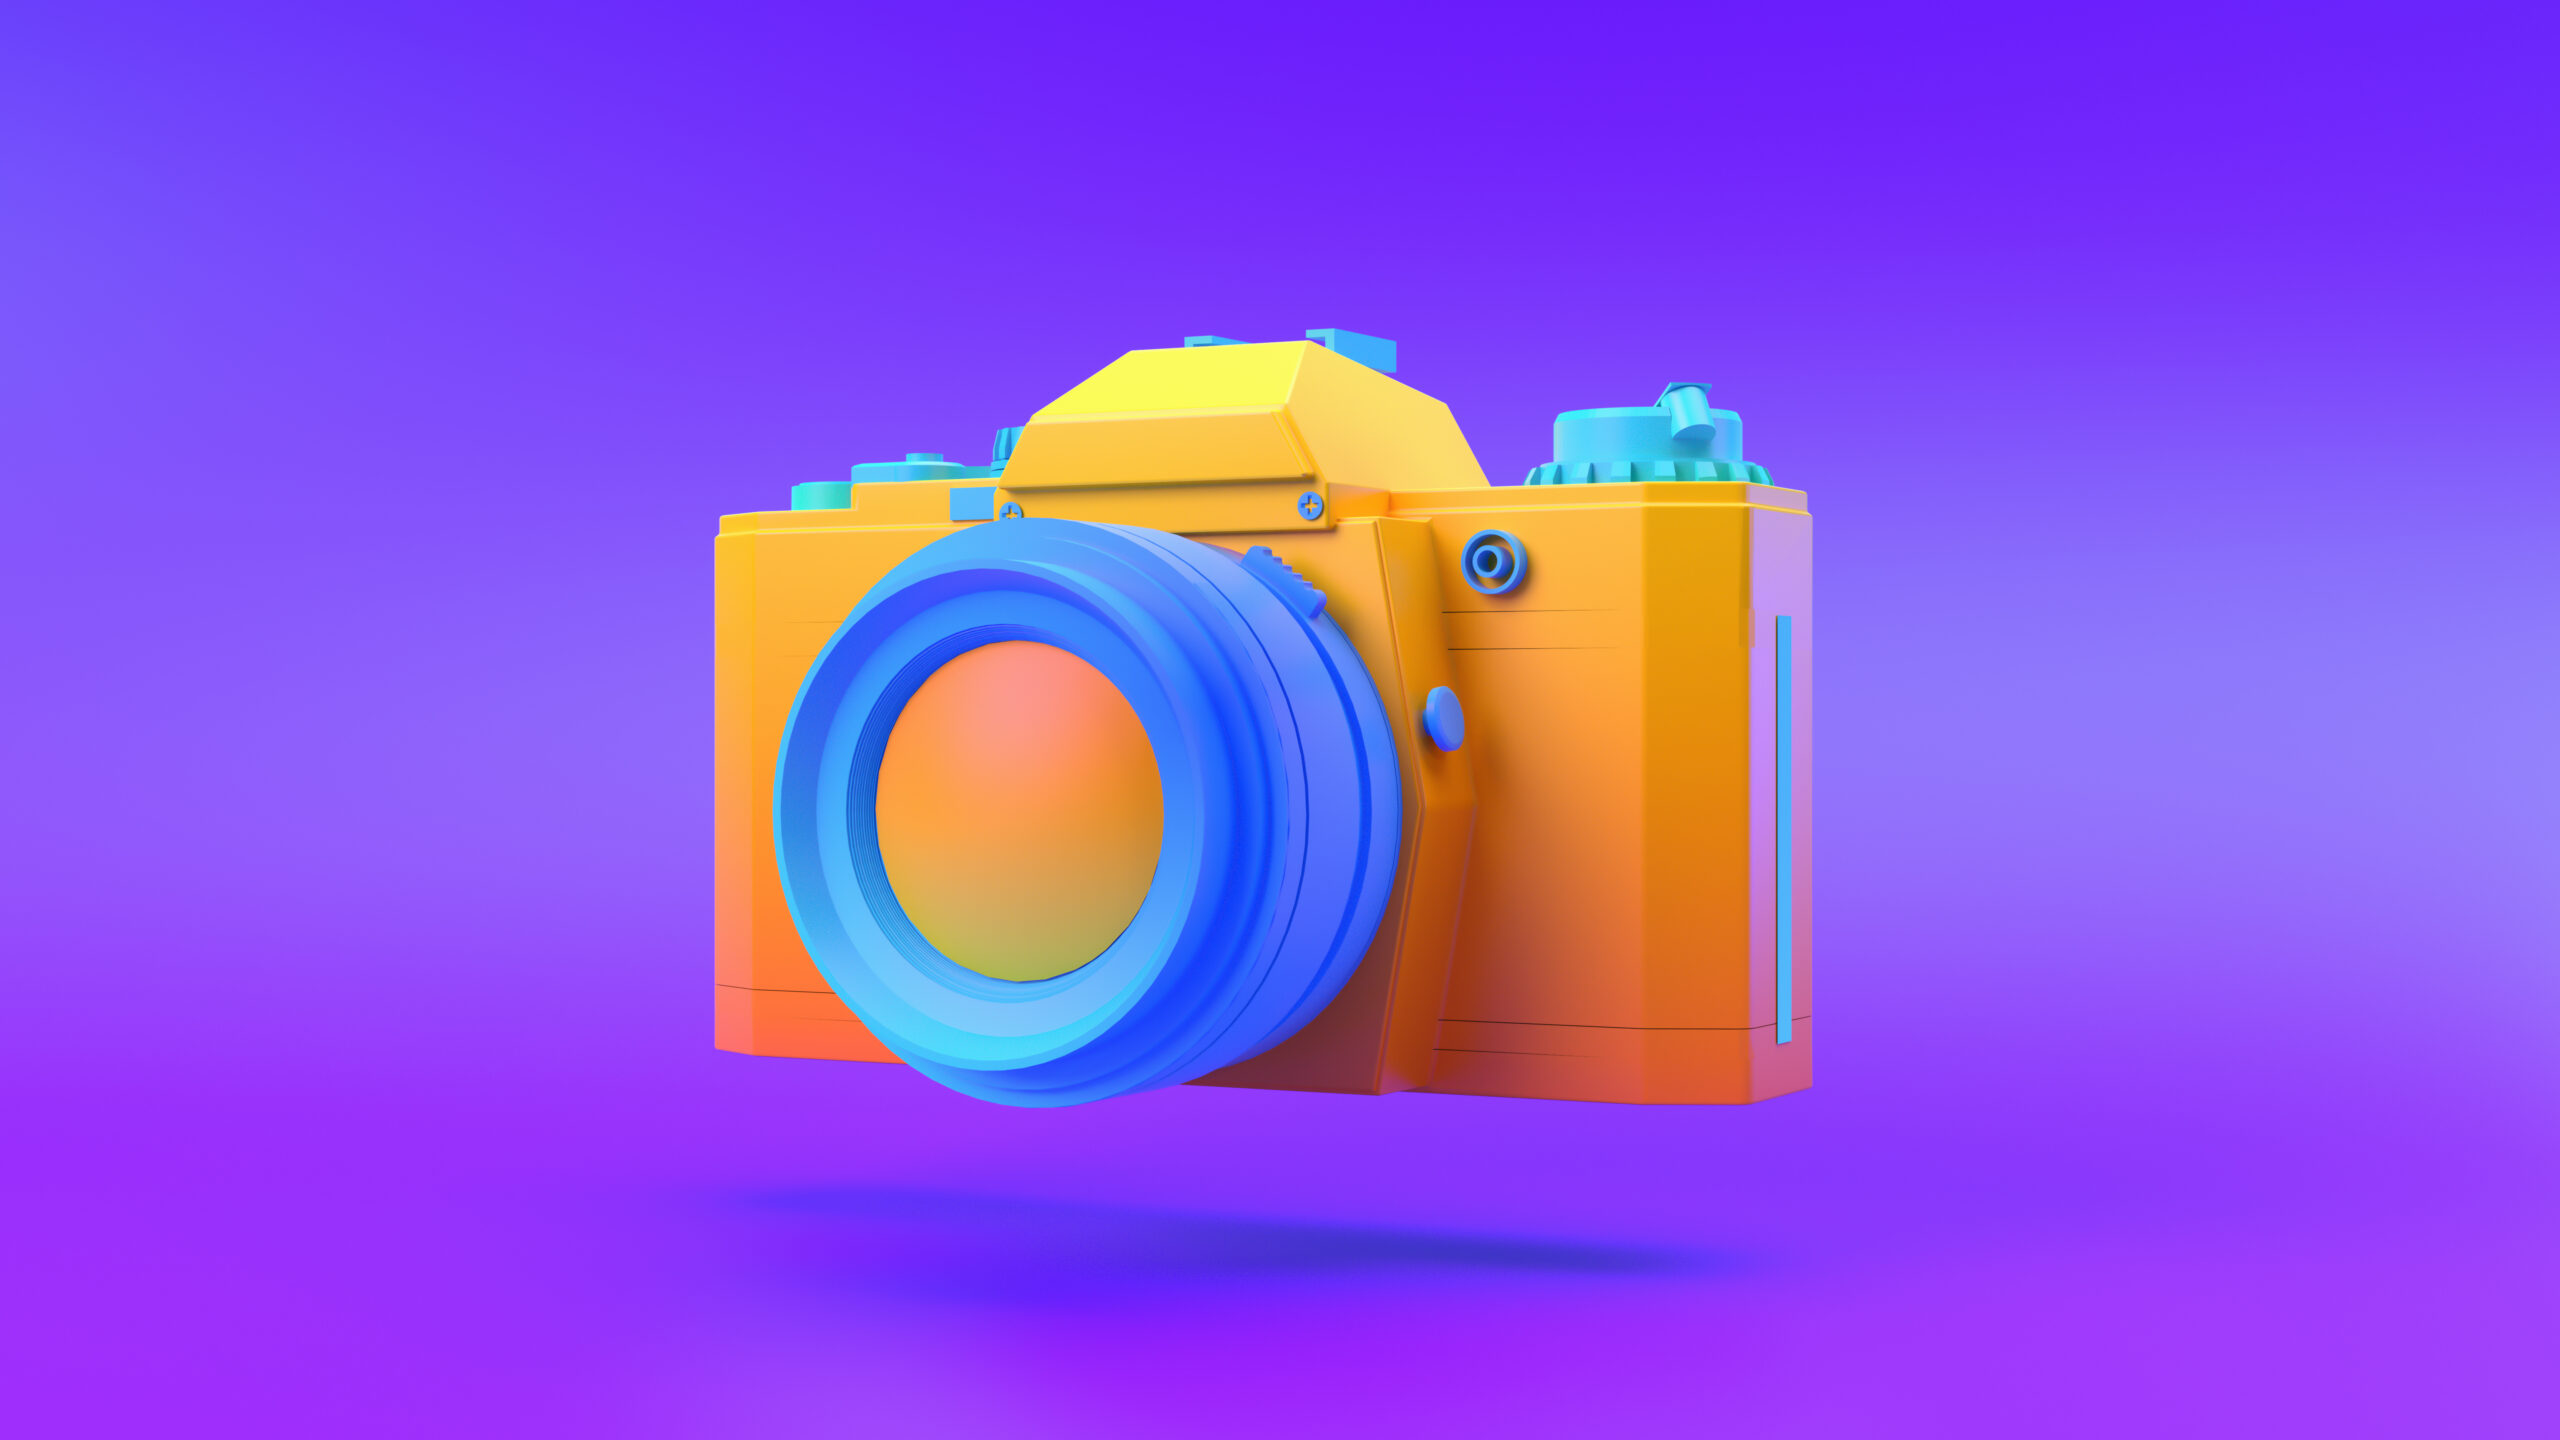 Multi-colored Camera on gradient background, 3d rendering.